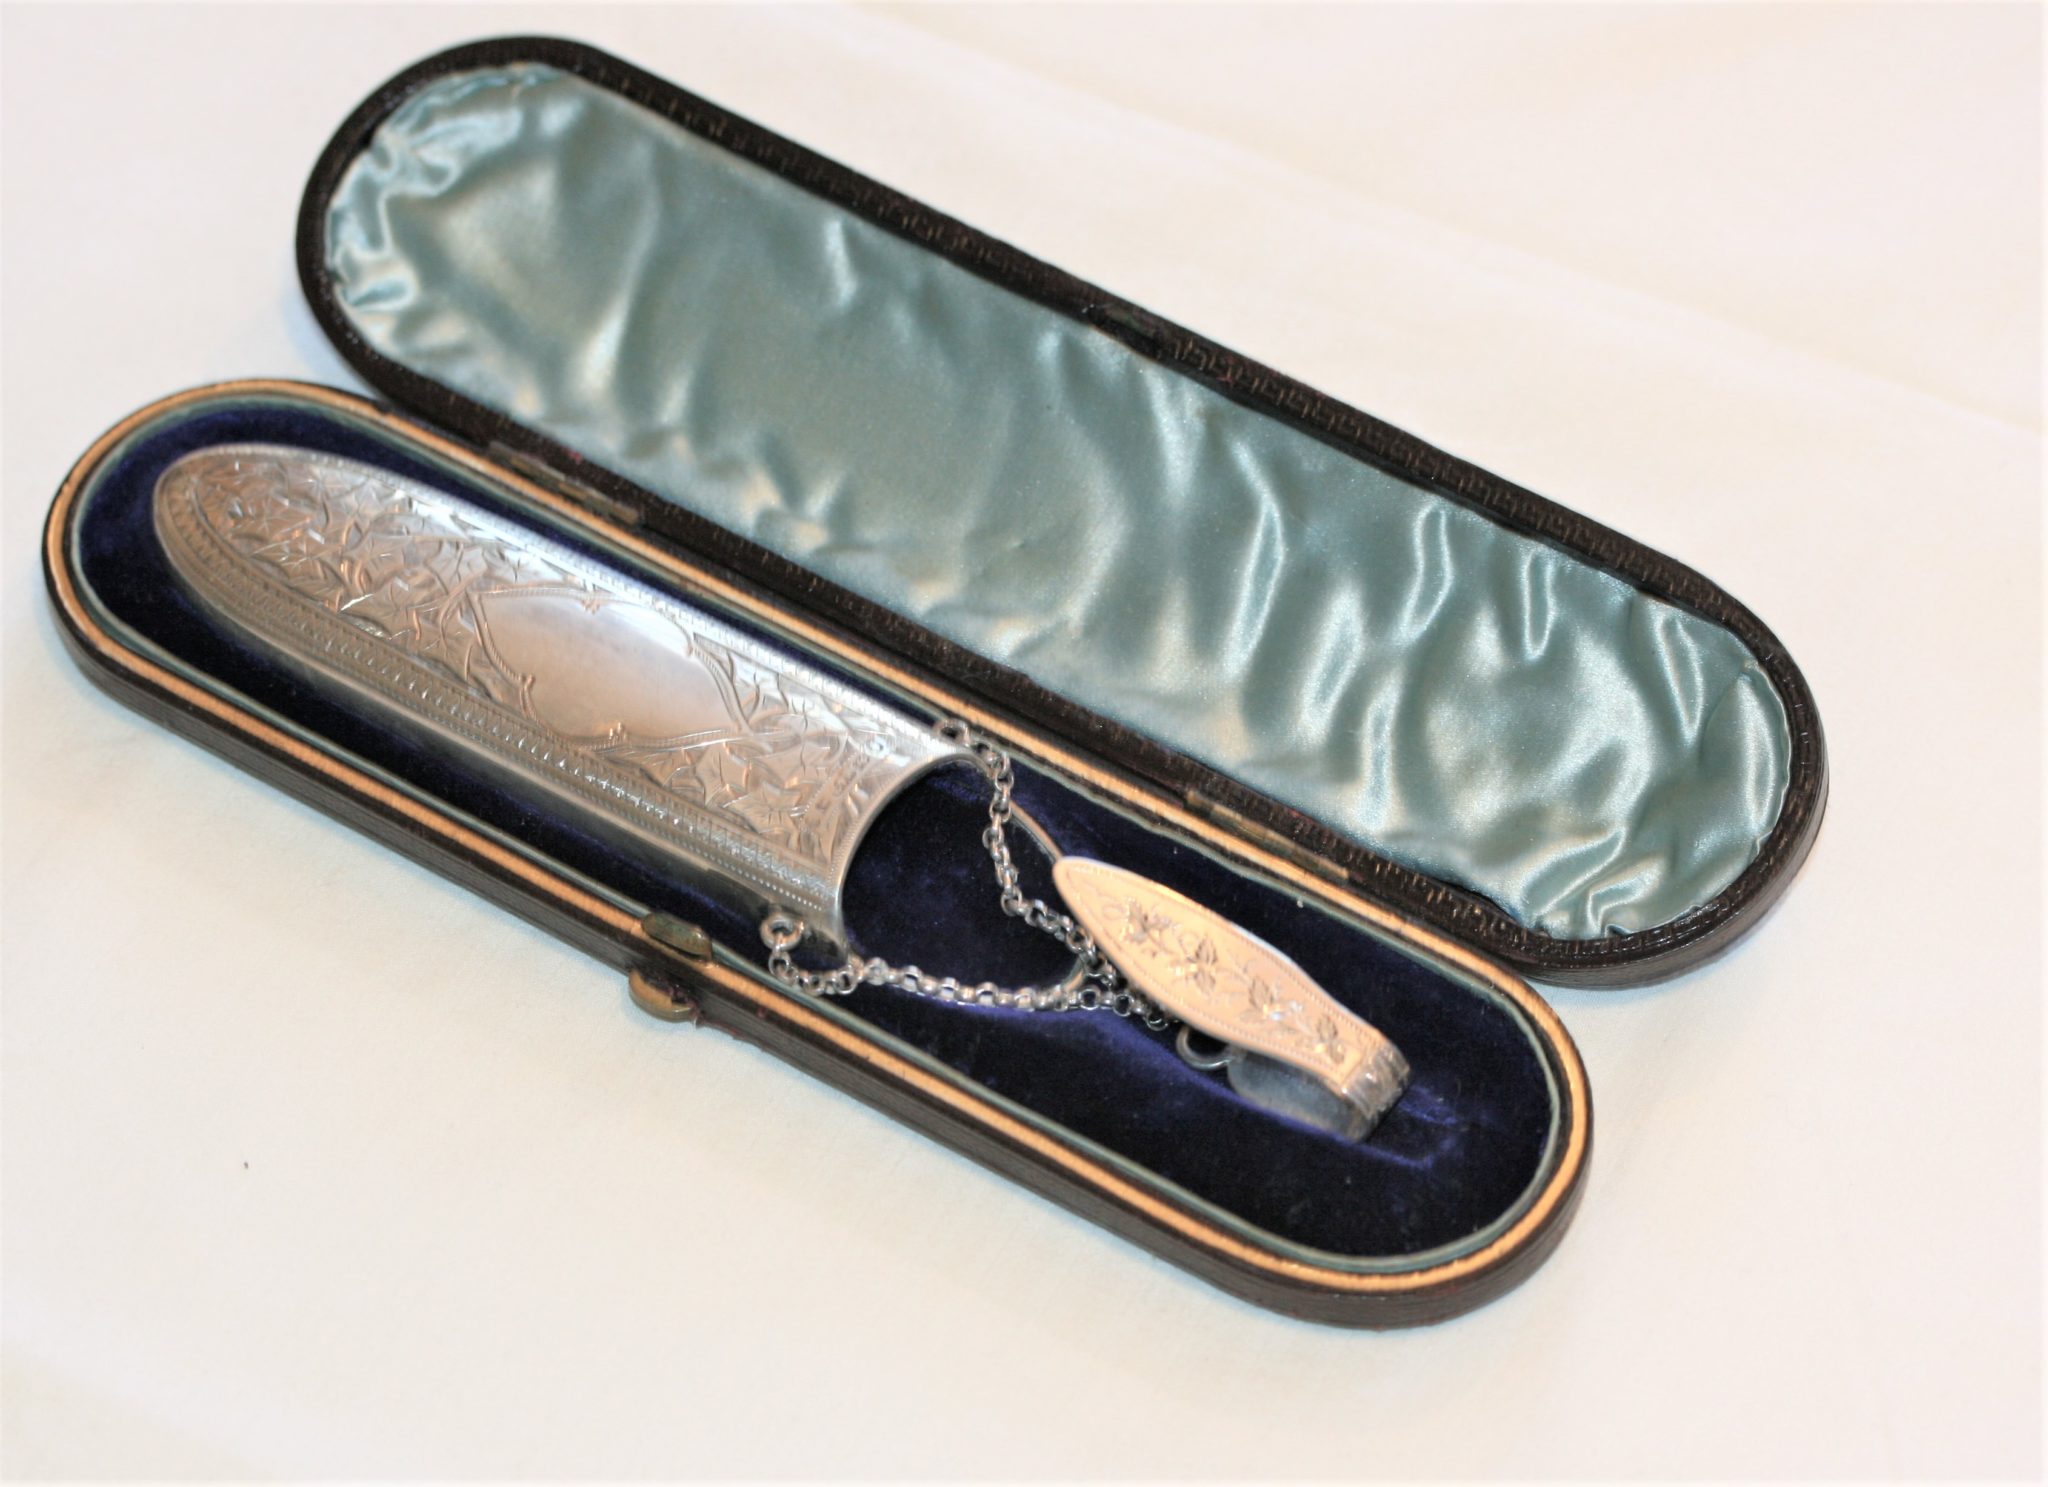 DATED 1887 SILVER CHATALAIN SPECTACLES CASE by HILLARD & THOMASON , WITH ITS ORIGINAL CASE, TIP TOP COND.